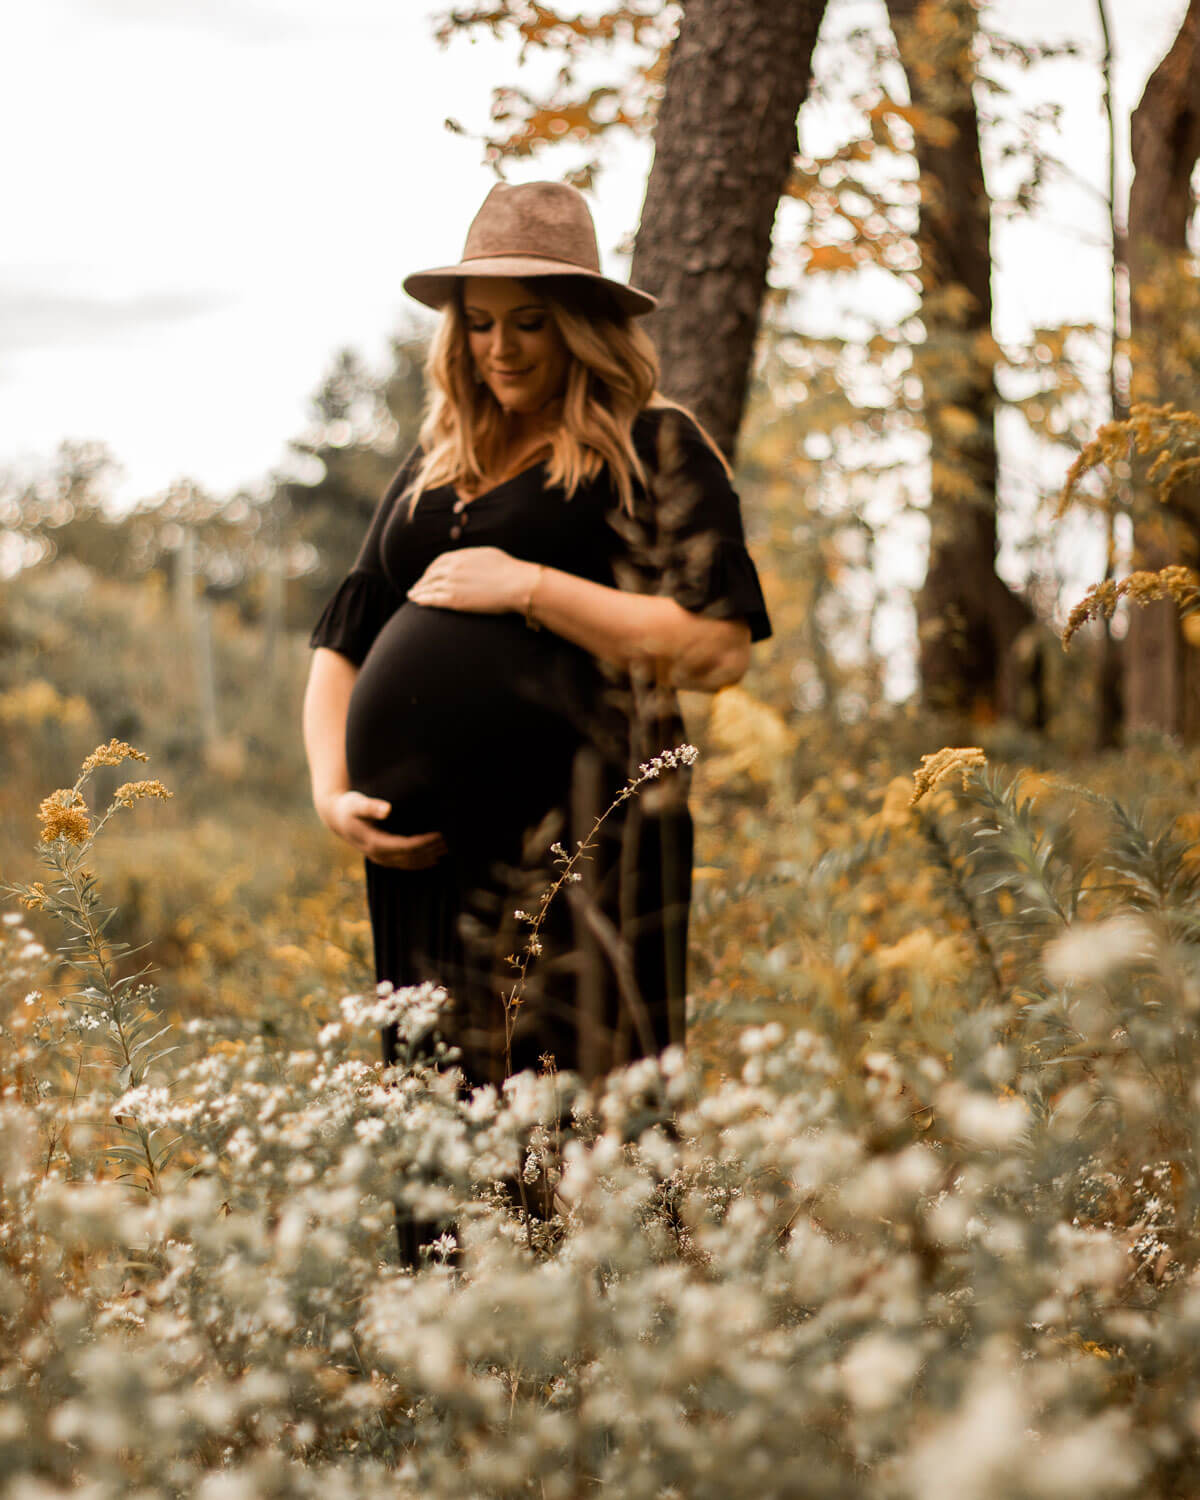 Midwife and Life - Maternity Fashion Essentials - Your Maternity